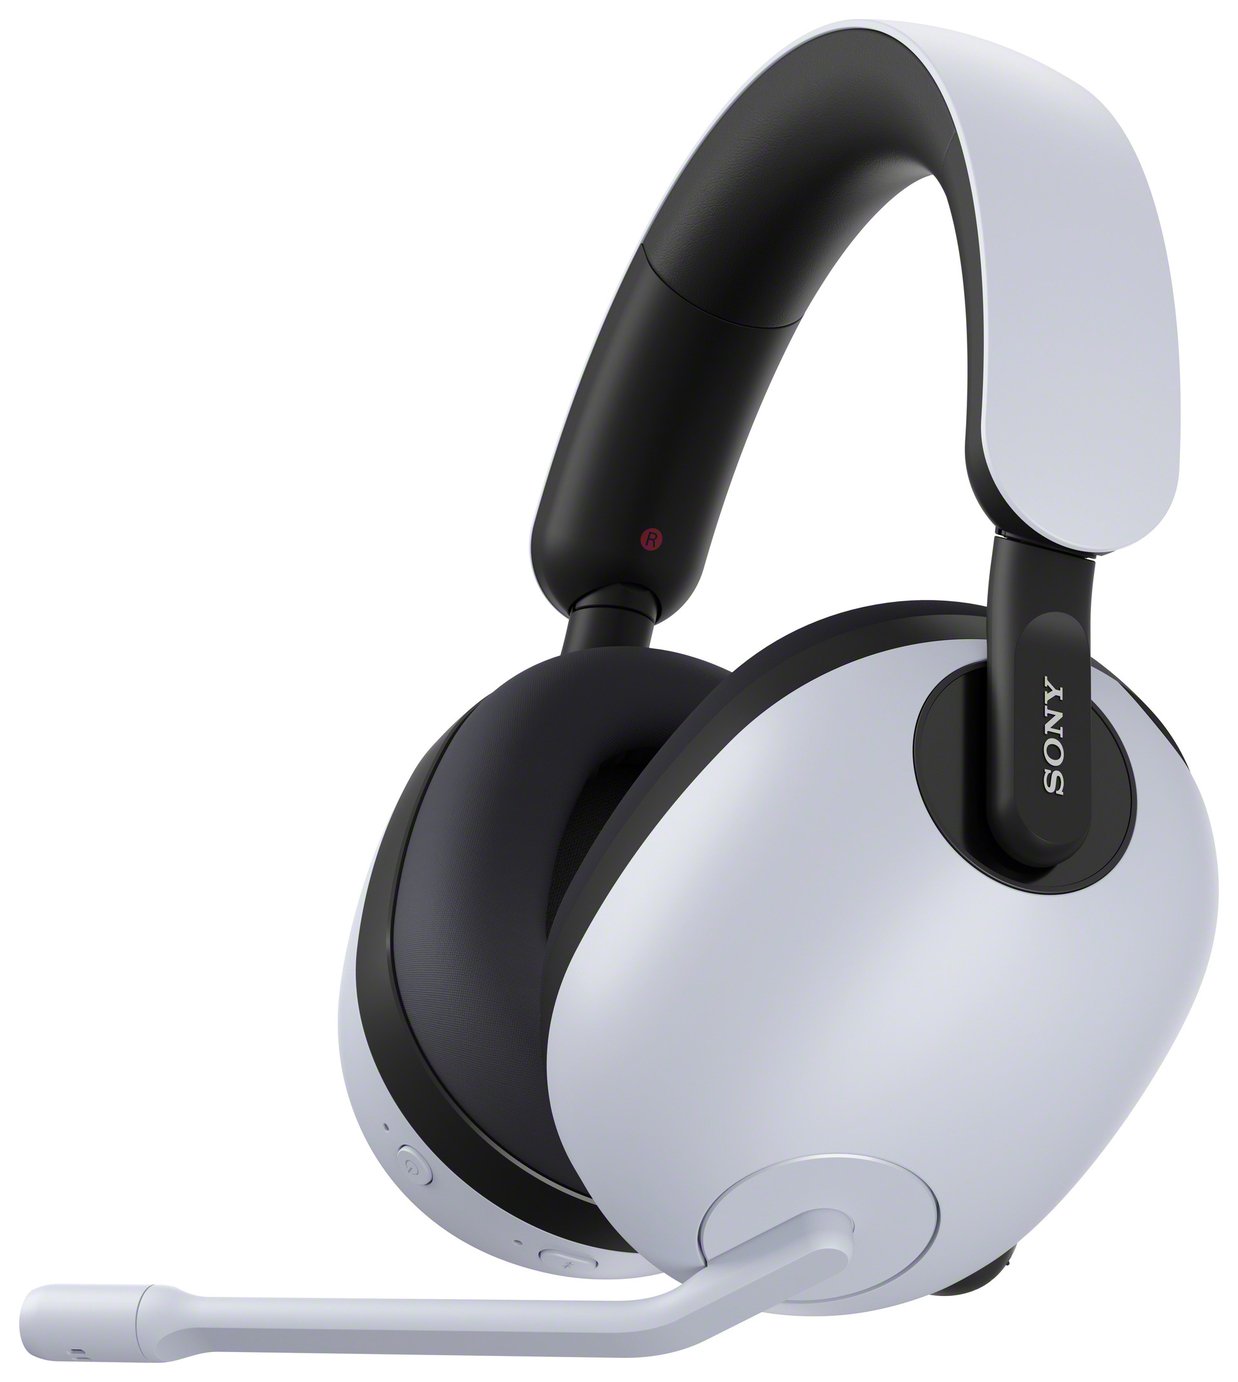 Sony INZONE H7 PS4, PS5, PC Wireless Gaming Headset - White